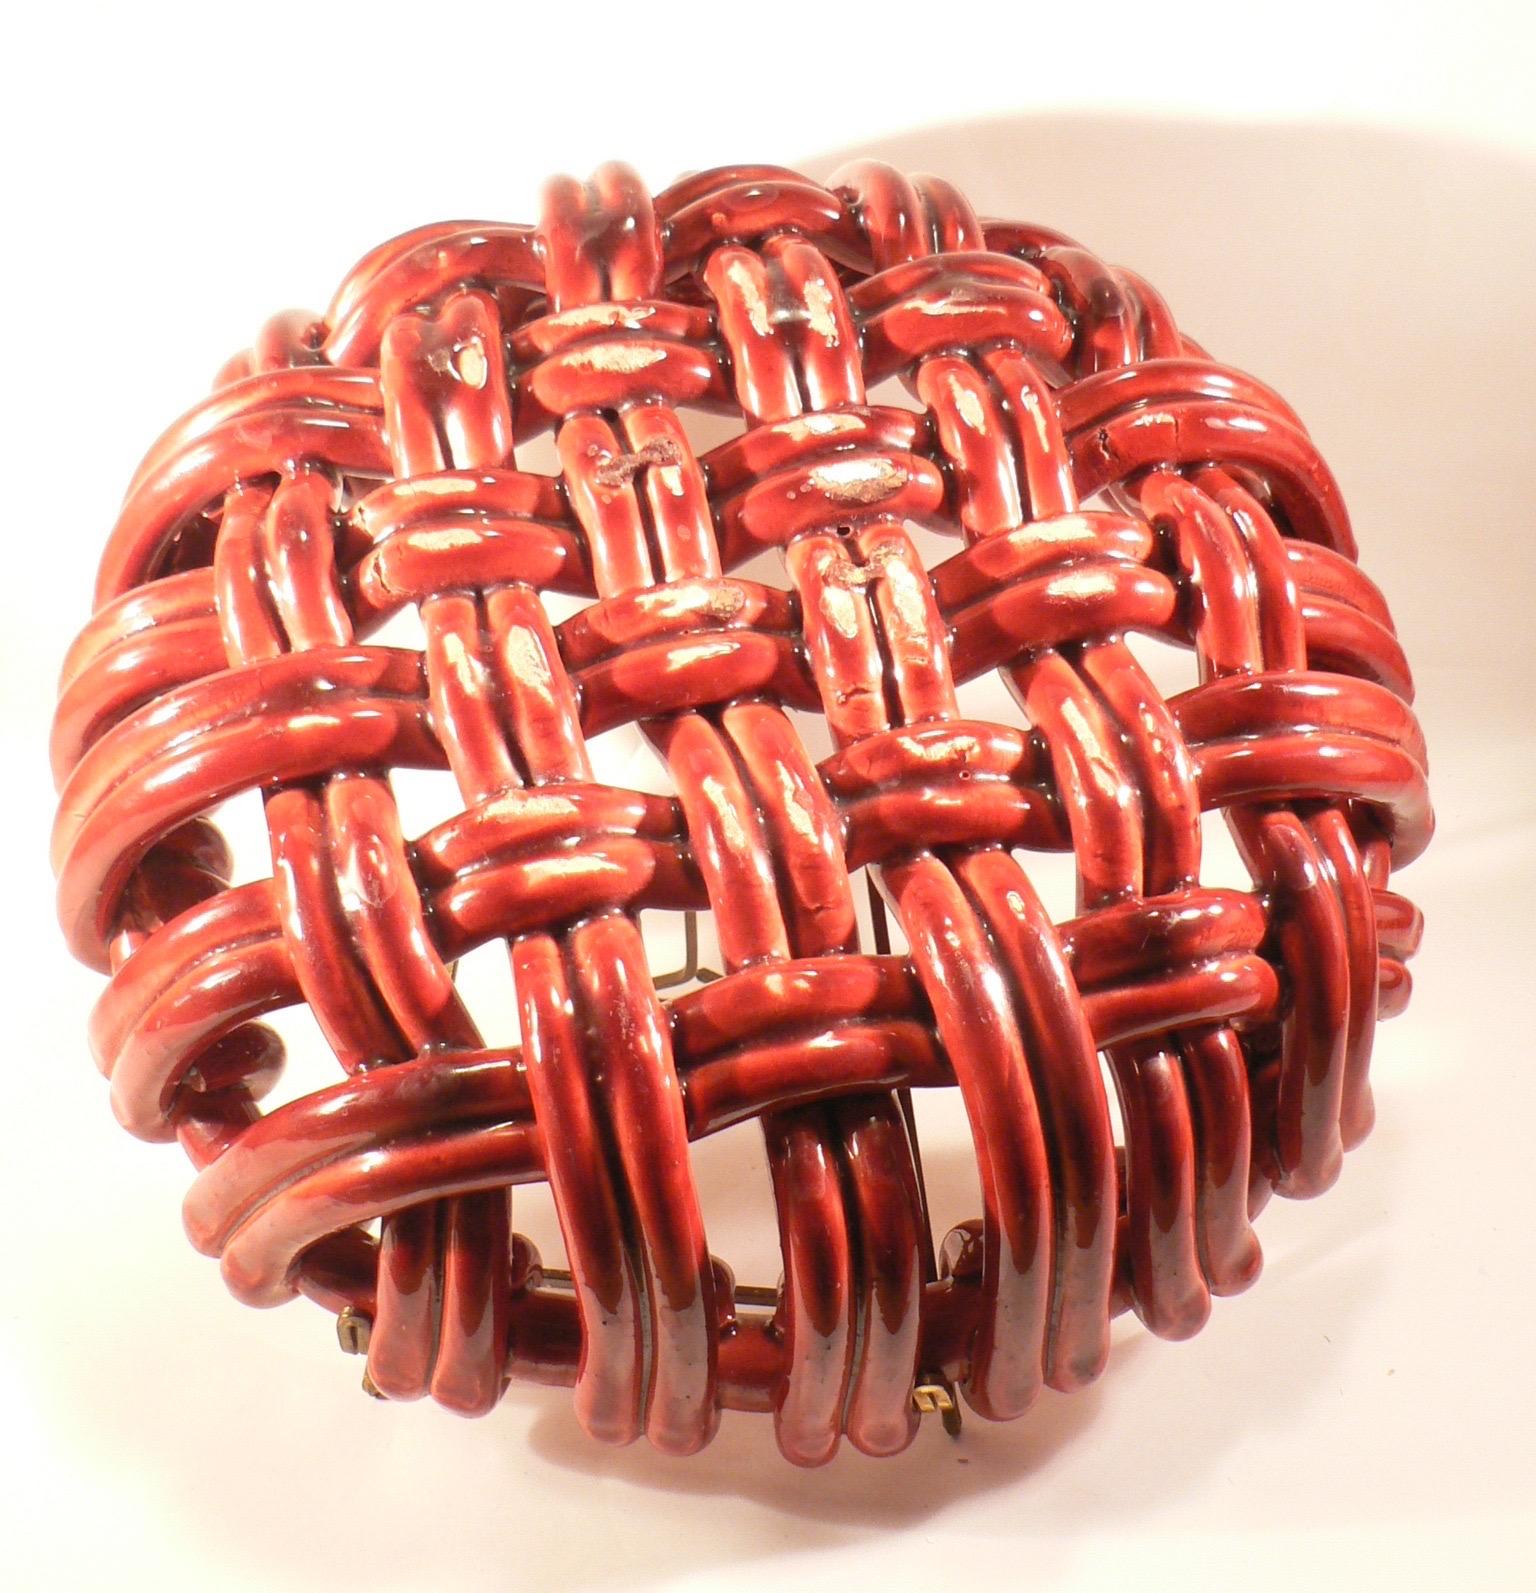 French Provincial Braided red ceramic bowl from Vallauris, France 1950s